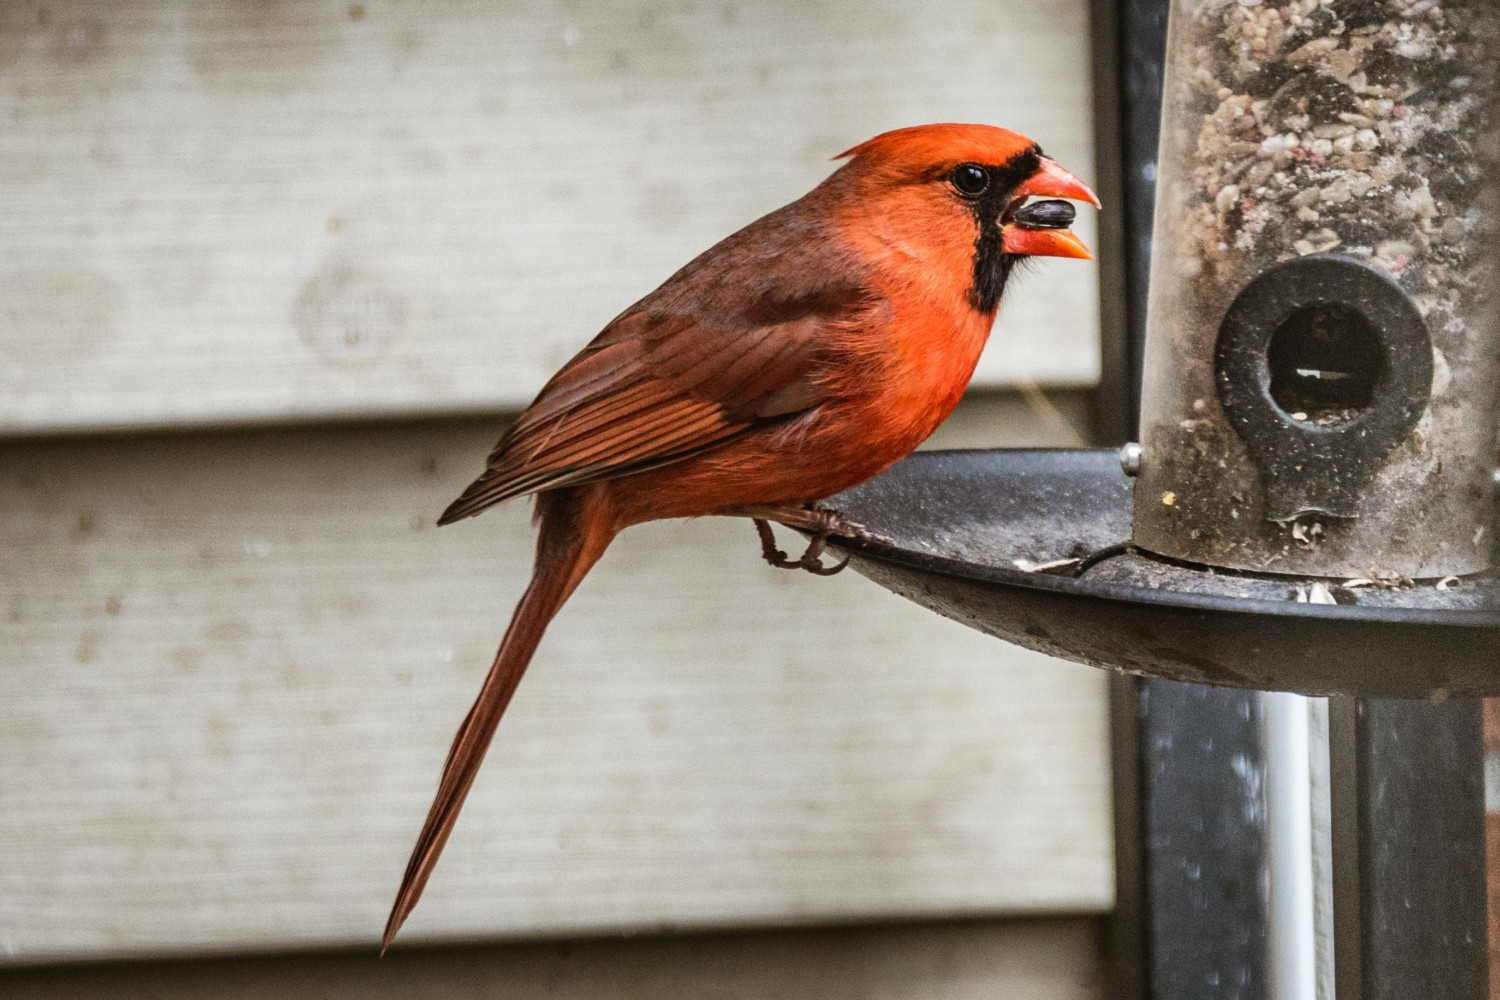 Northern Cardinal perched on bird feeder with seed